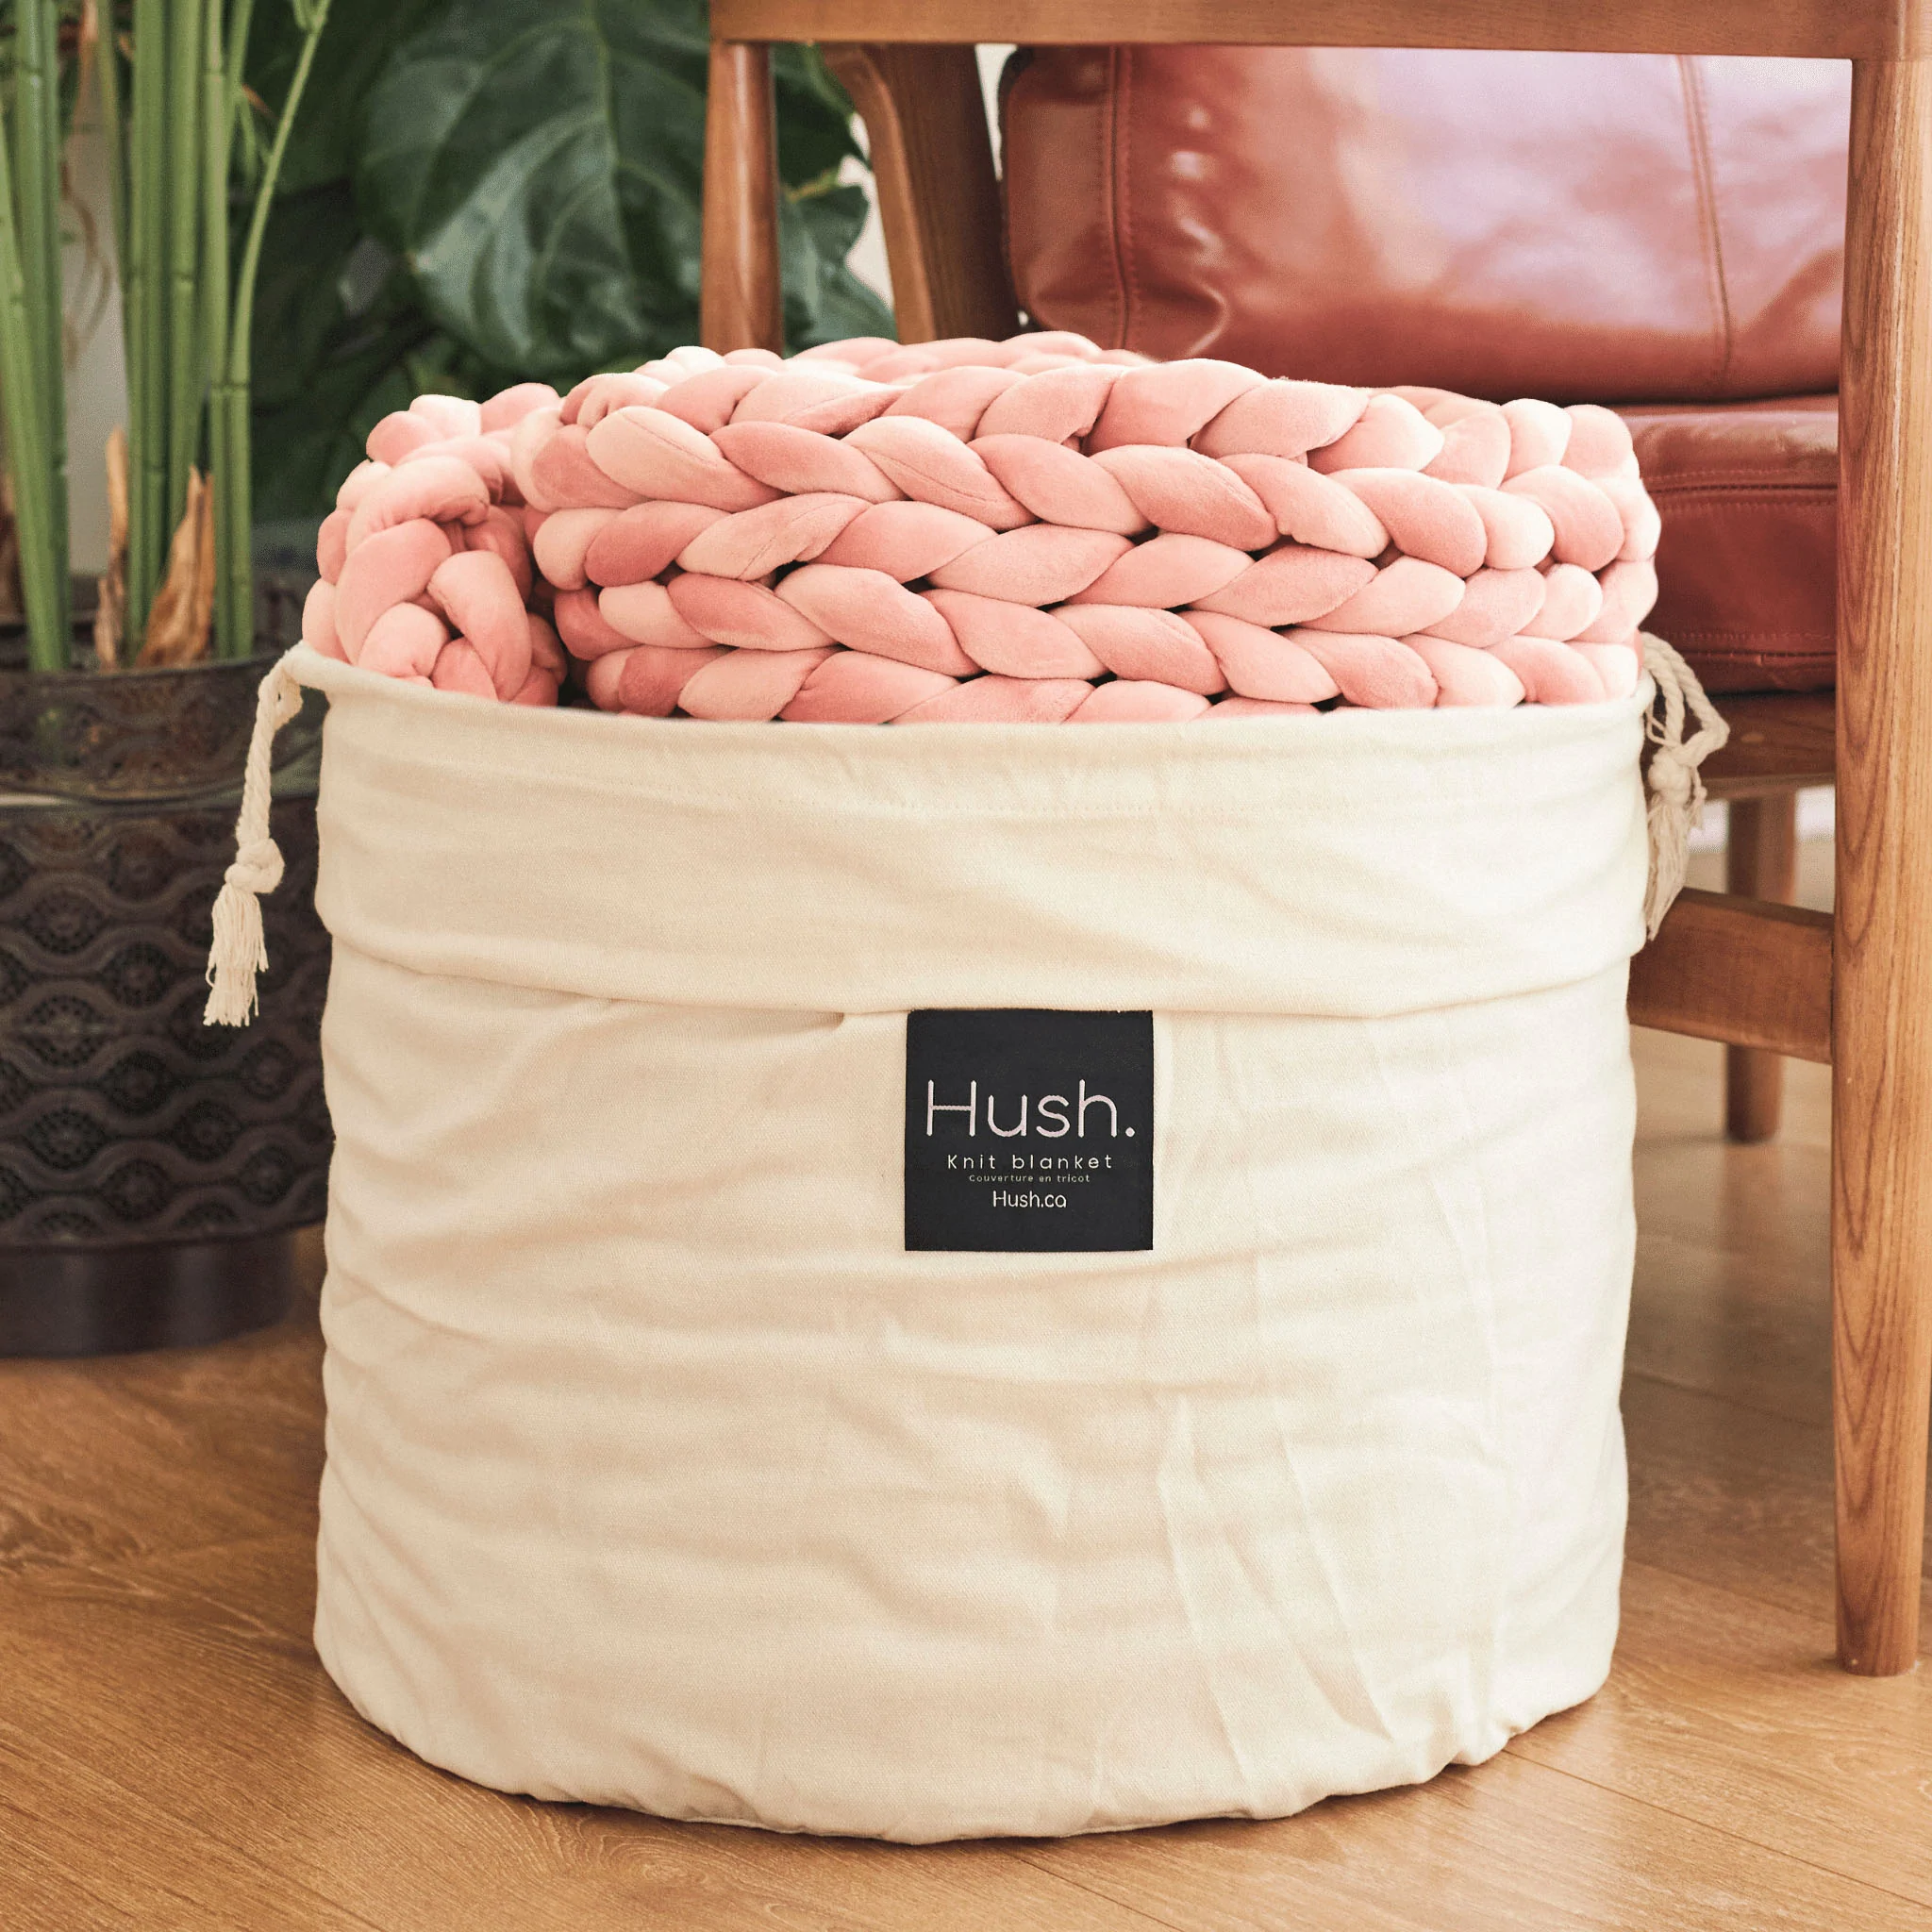 hush knit weighted blanket in packaging